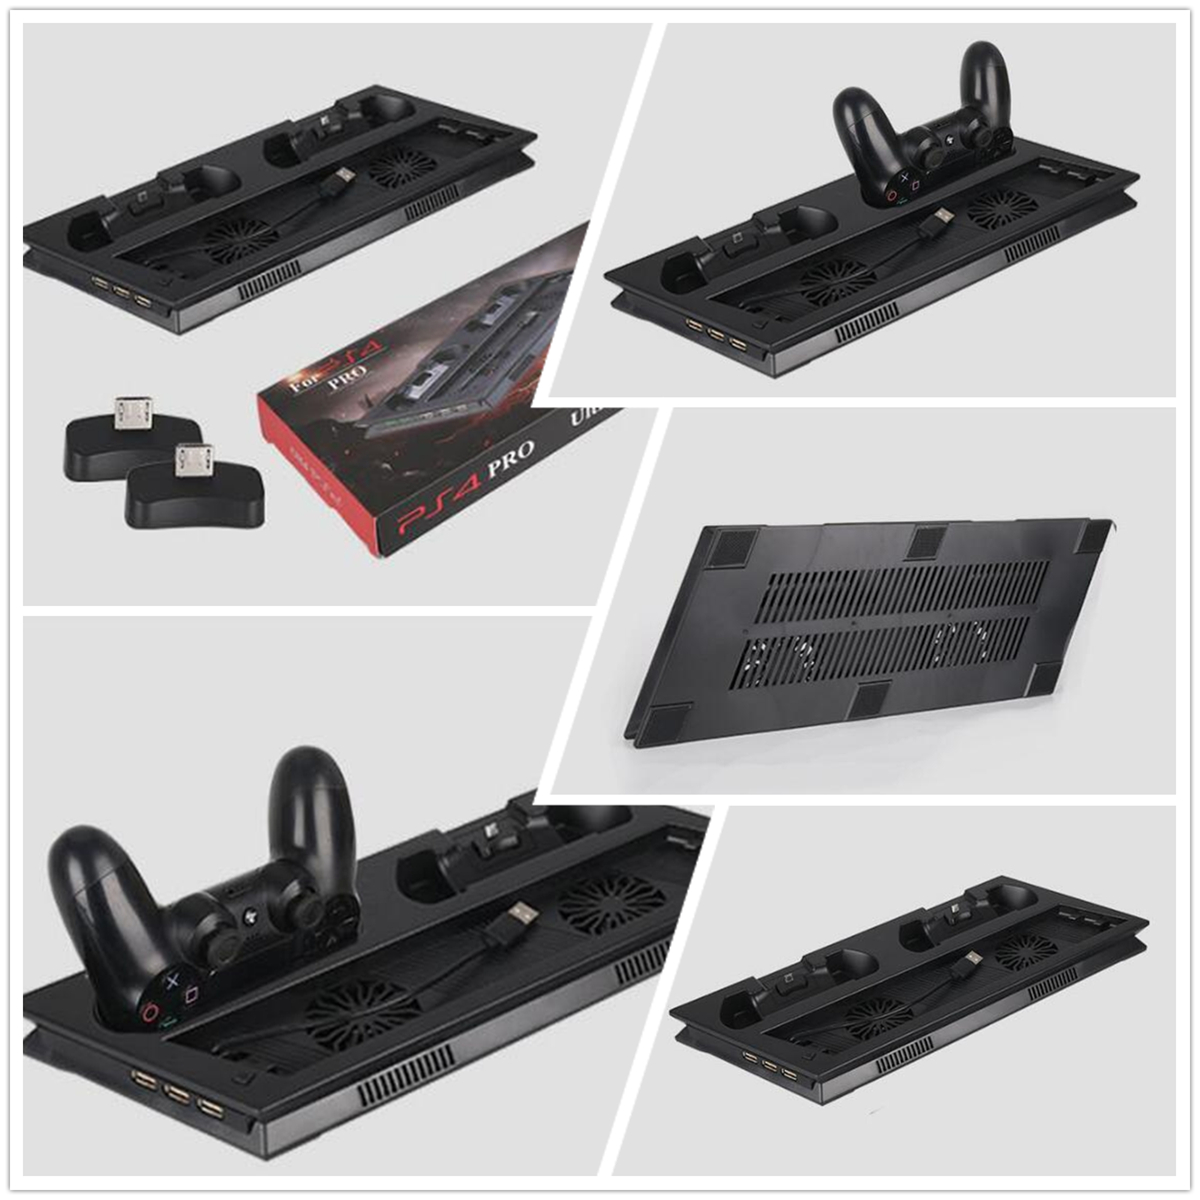 LED Charger Station Stand Charging Dock Cooling Fan for Sony Playstation 4 PS4 PRO Slim Game Console Gamepad 99